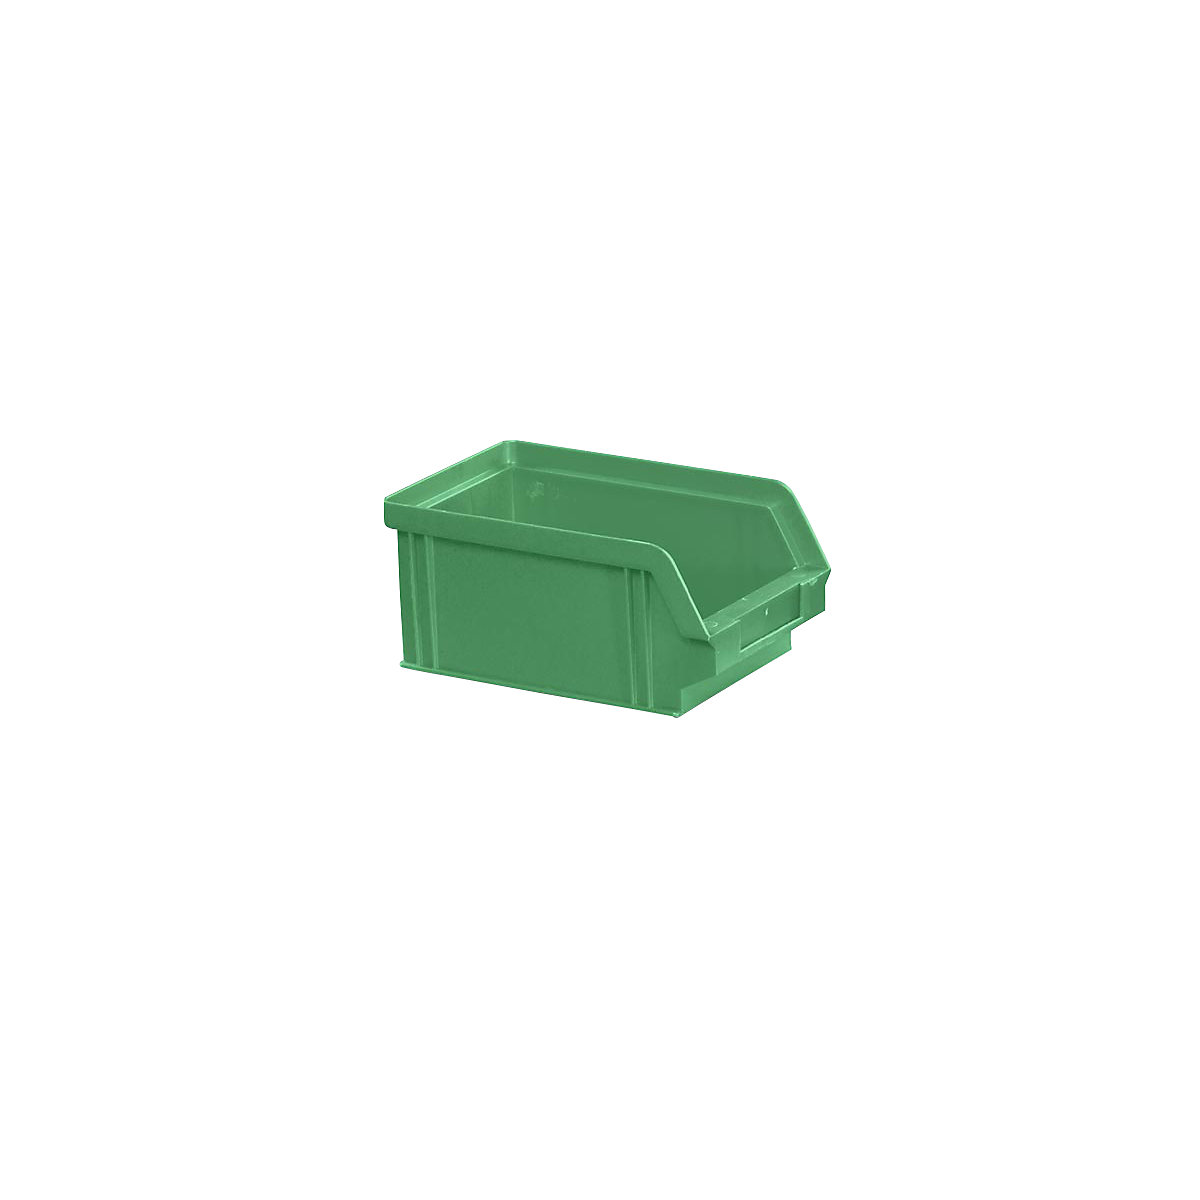 Open fronted storage bin made of polystyrene, LxWxH 160 x 102 x 75 mm, pack of 32, green-5